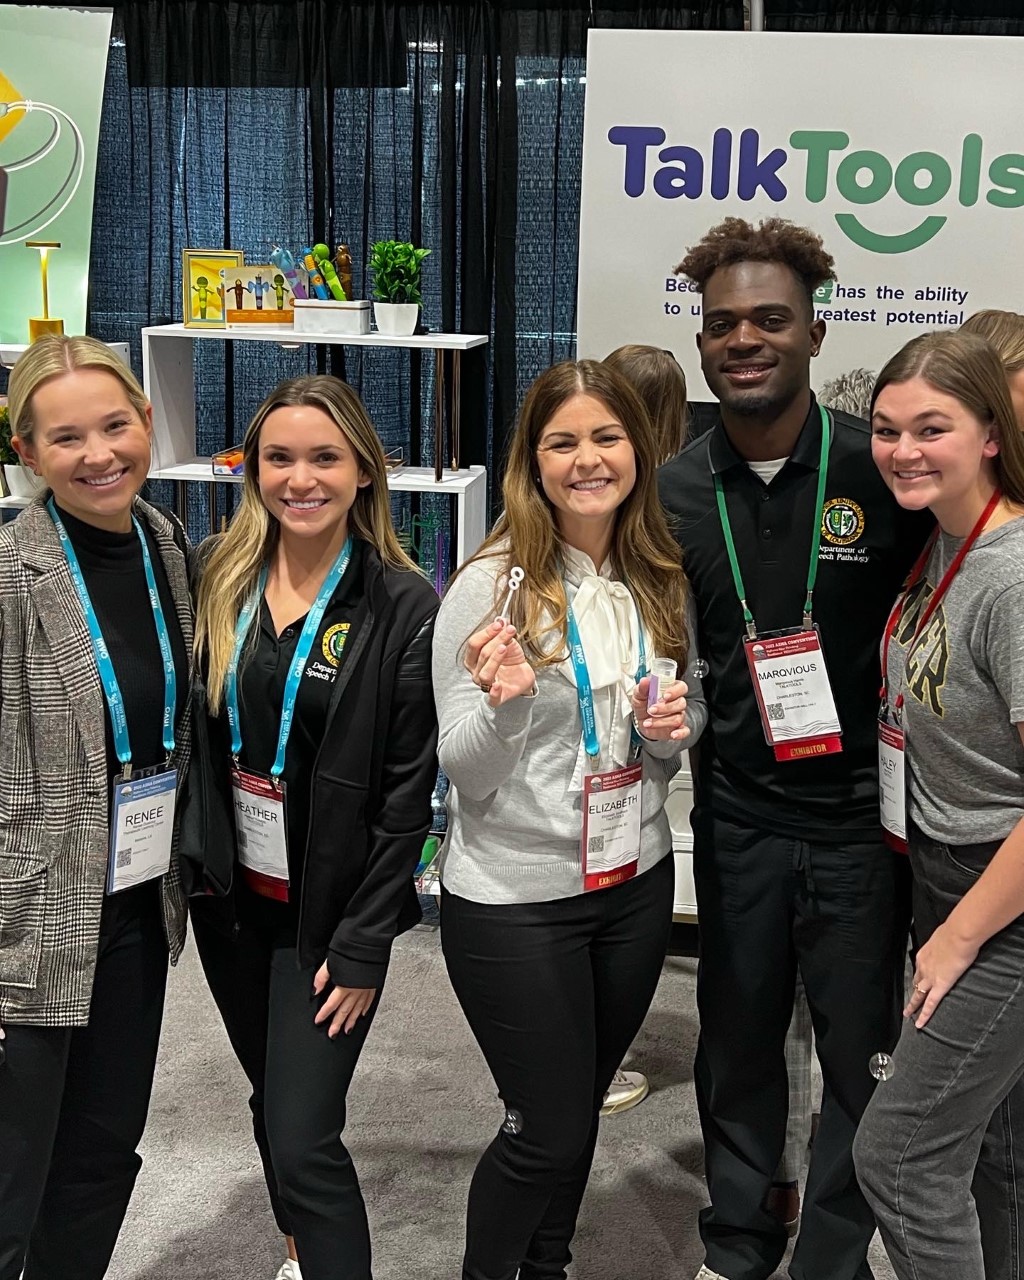 Graduate students and alumni stopped for a picture in the TalkTools booth at the 2022 ASHA Convention.